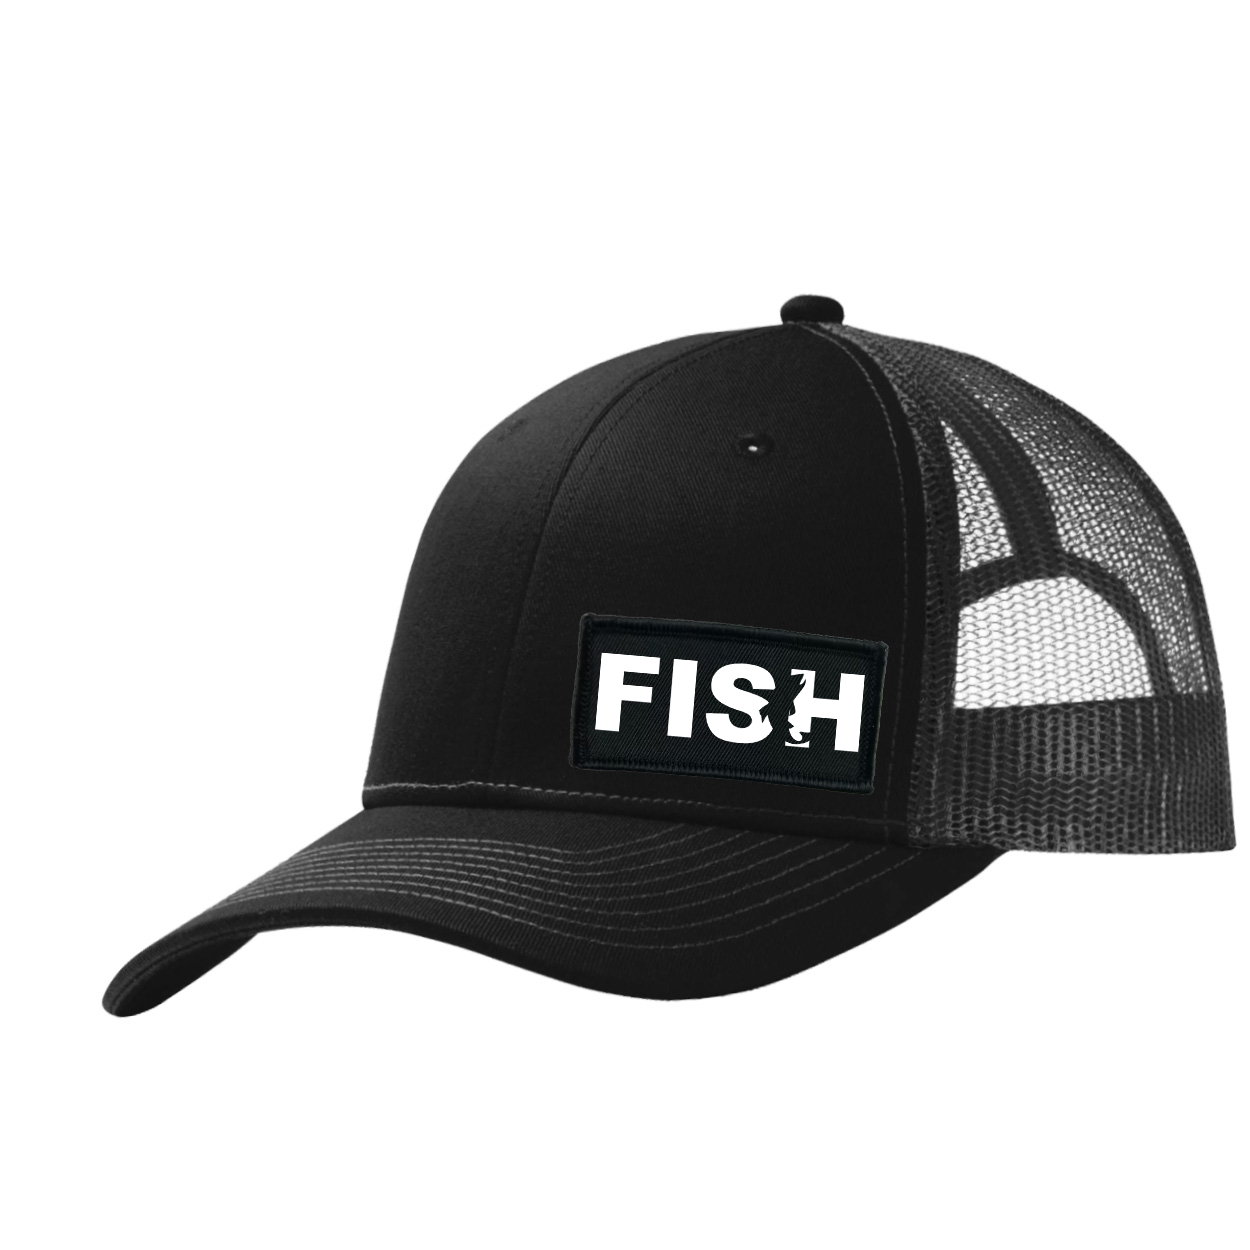 Fish Catch Logo Night Out Woven Patch Snapback Trucker Hat Black/Gray